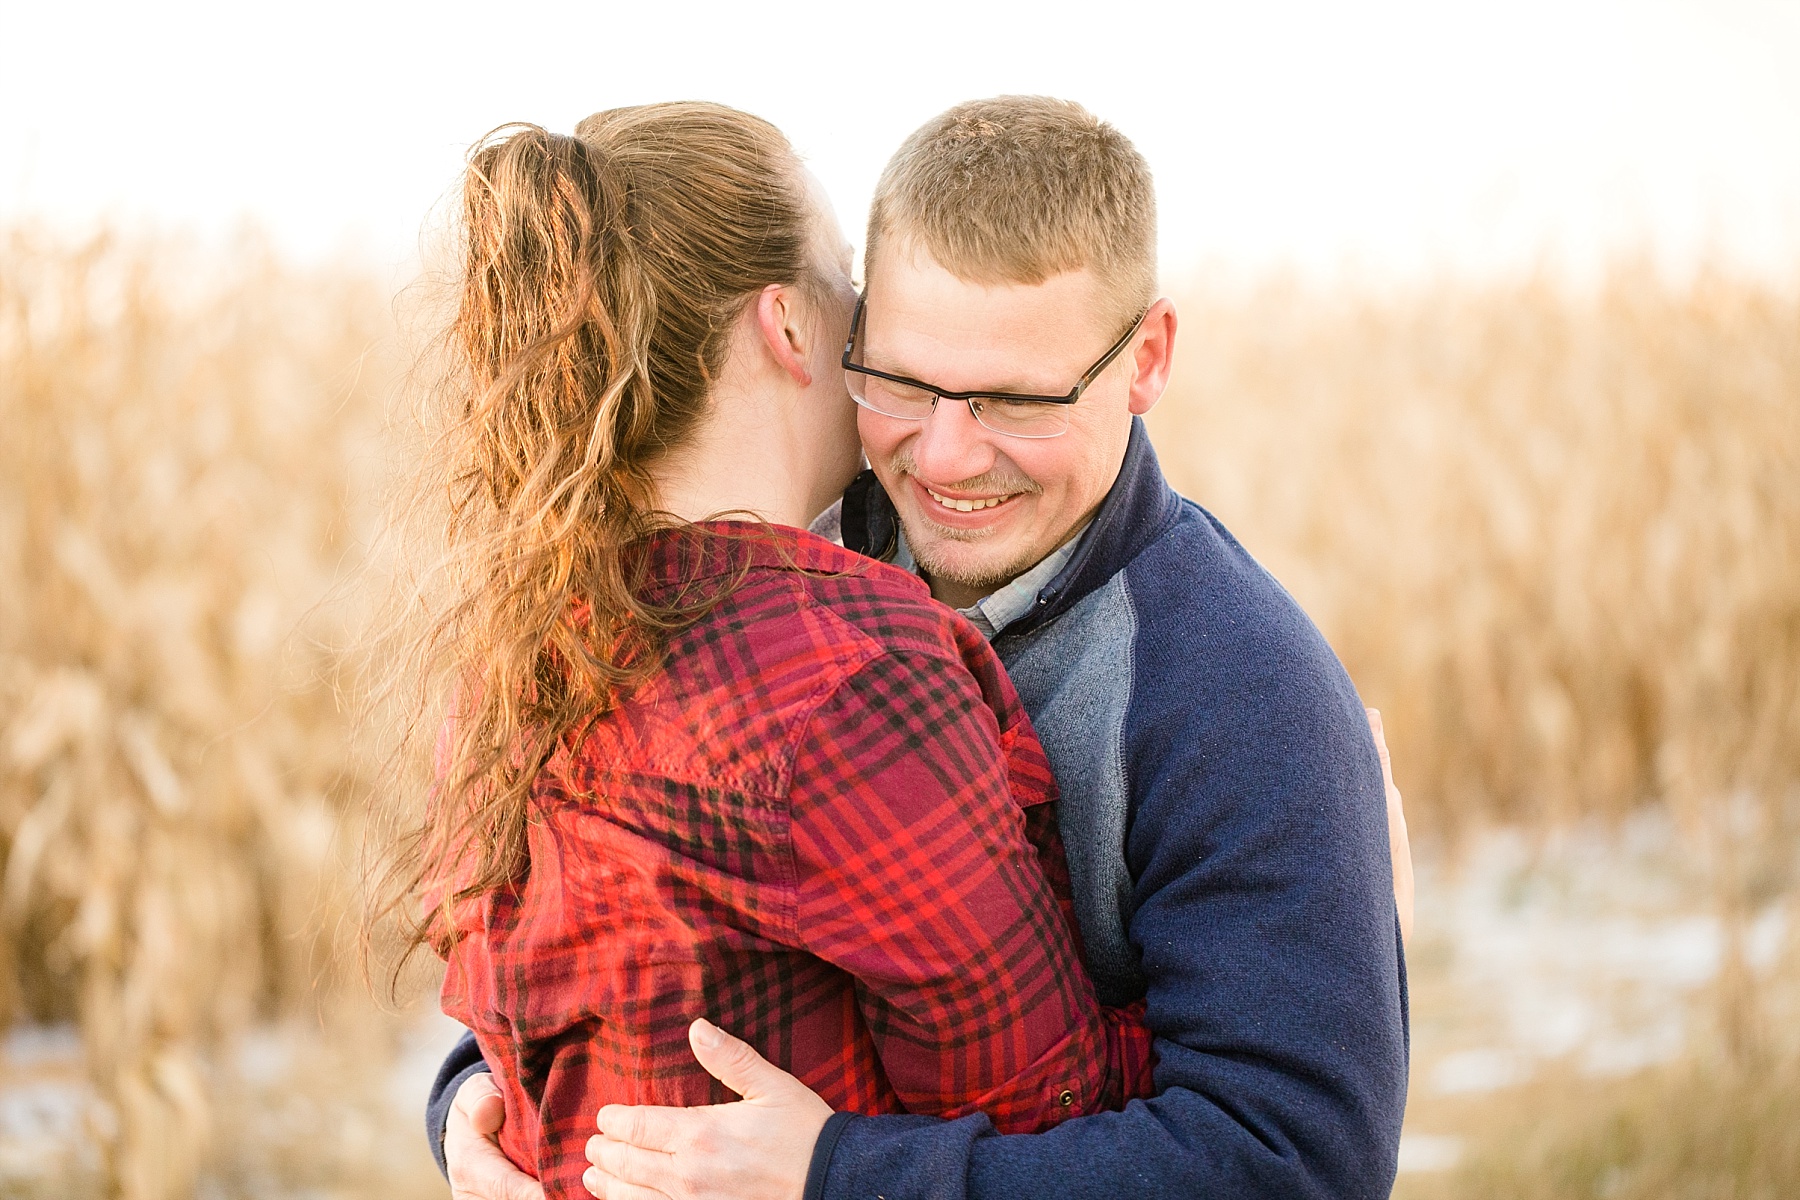 Emily and Phil explored Sheldon, WI and their dairy farm for their hometown engagement session.